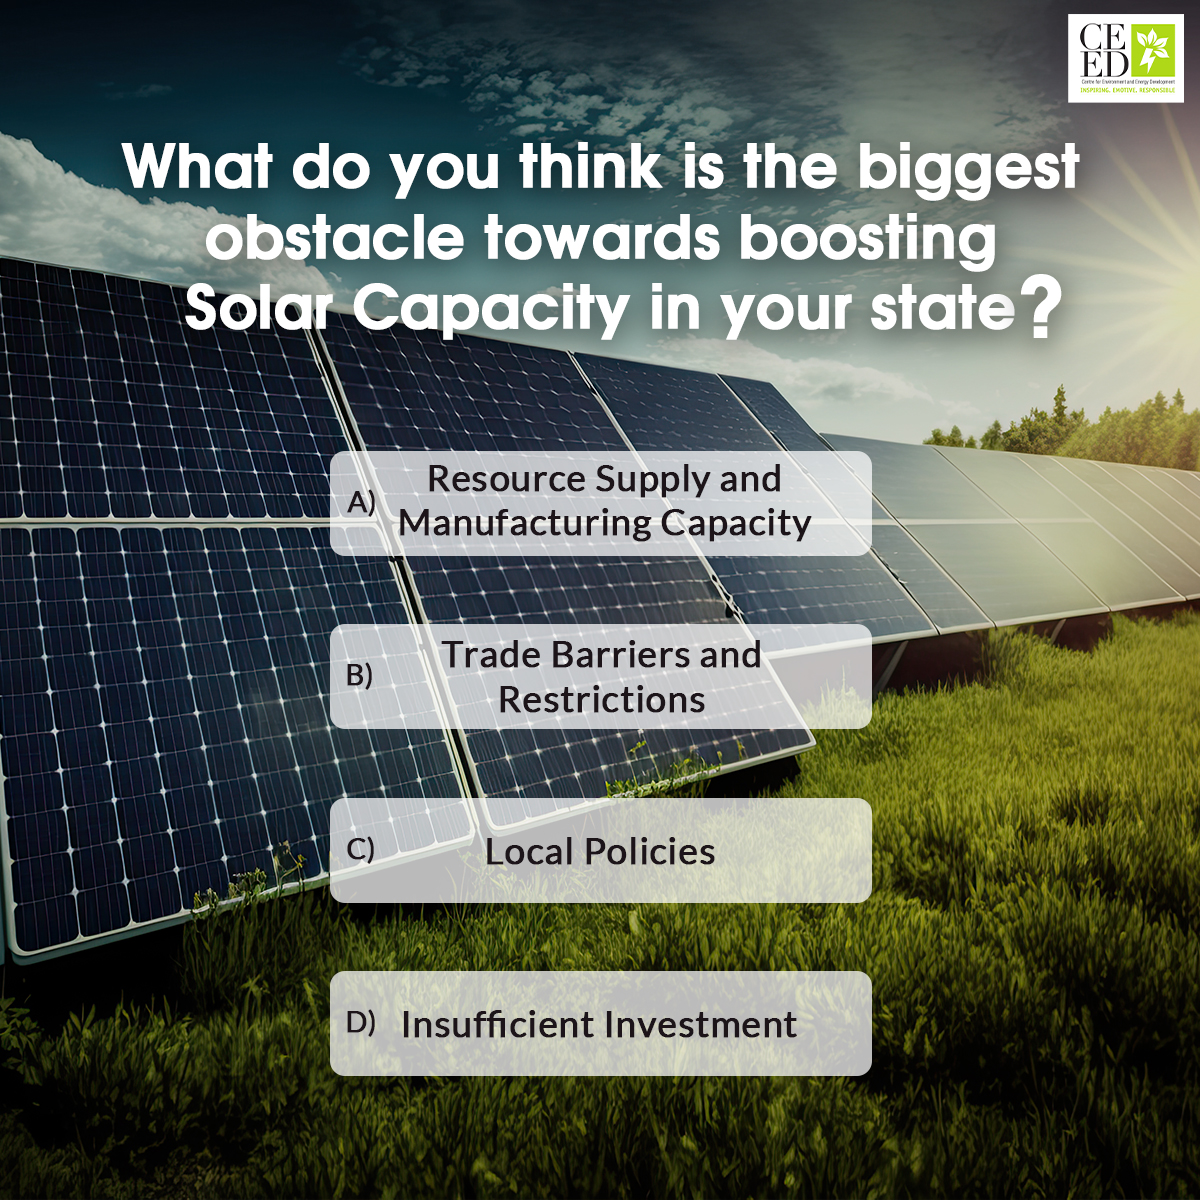 Join the Conversation: Despite promising trends, what's the key hurdle hindering solar capacity growth in your state? Share your insights in the comments below Share your insights in the comments below. #CleanEnergy #solarenergy